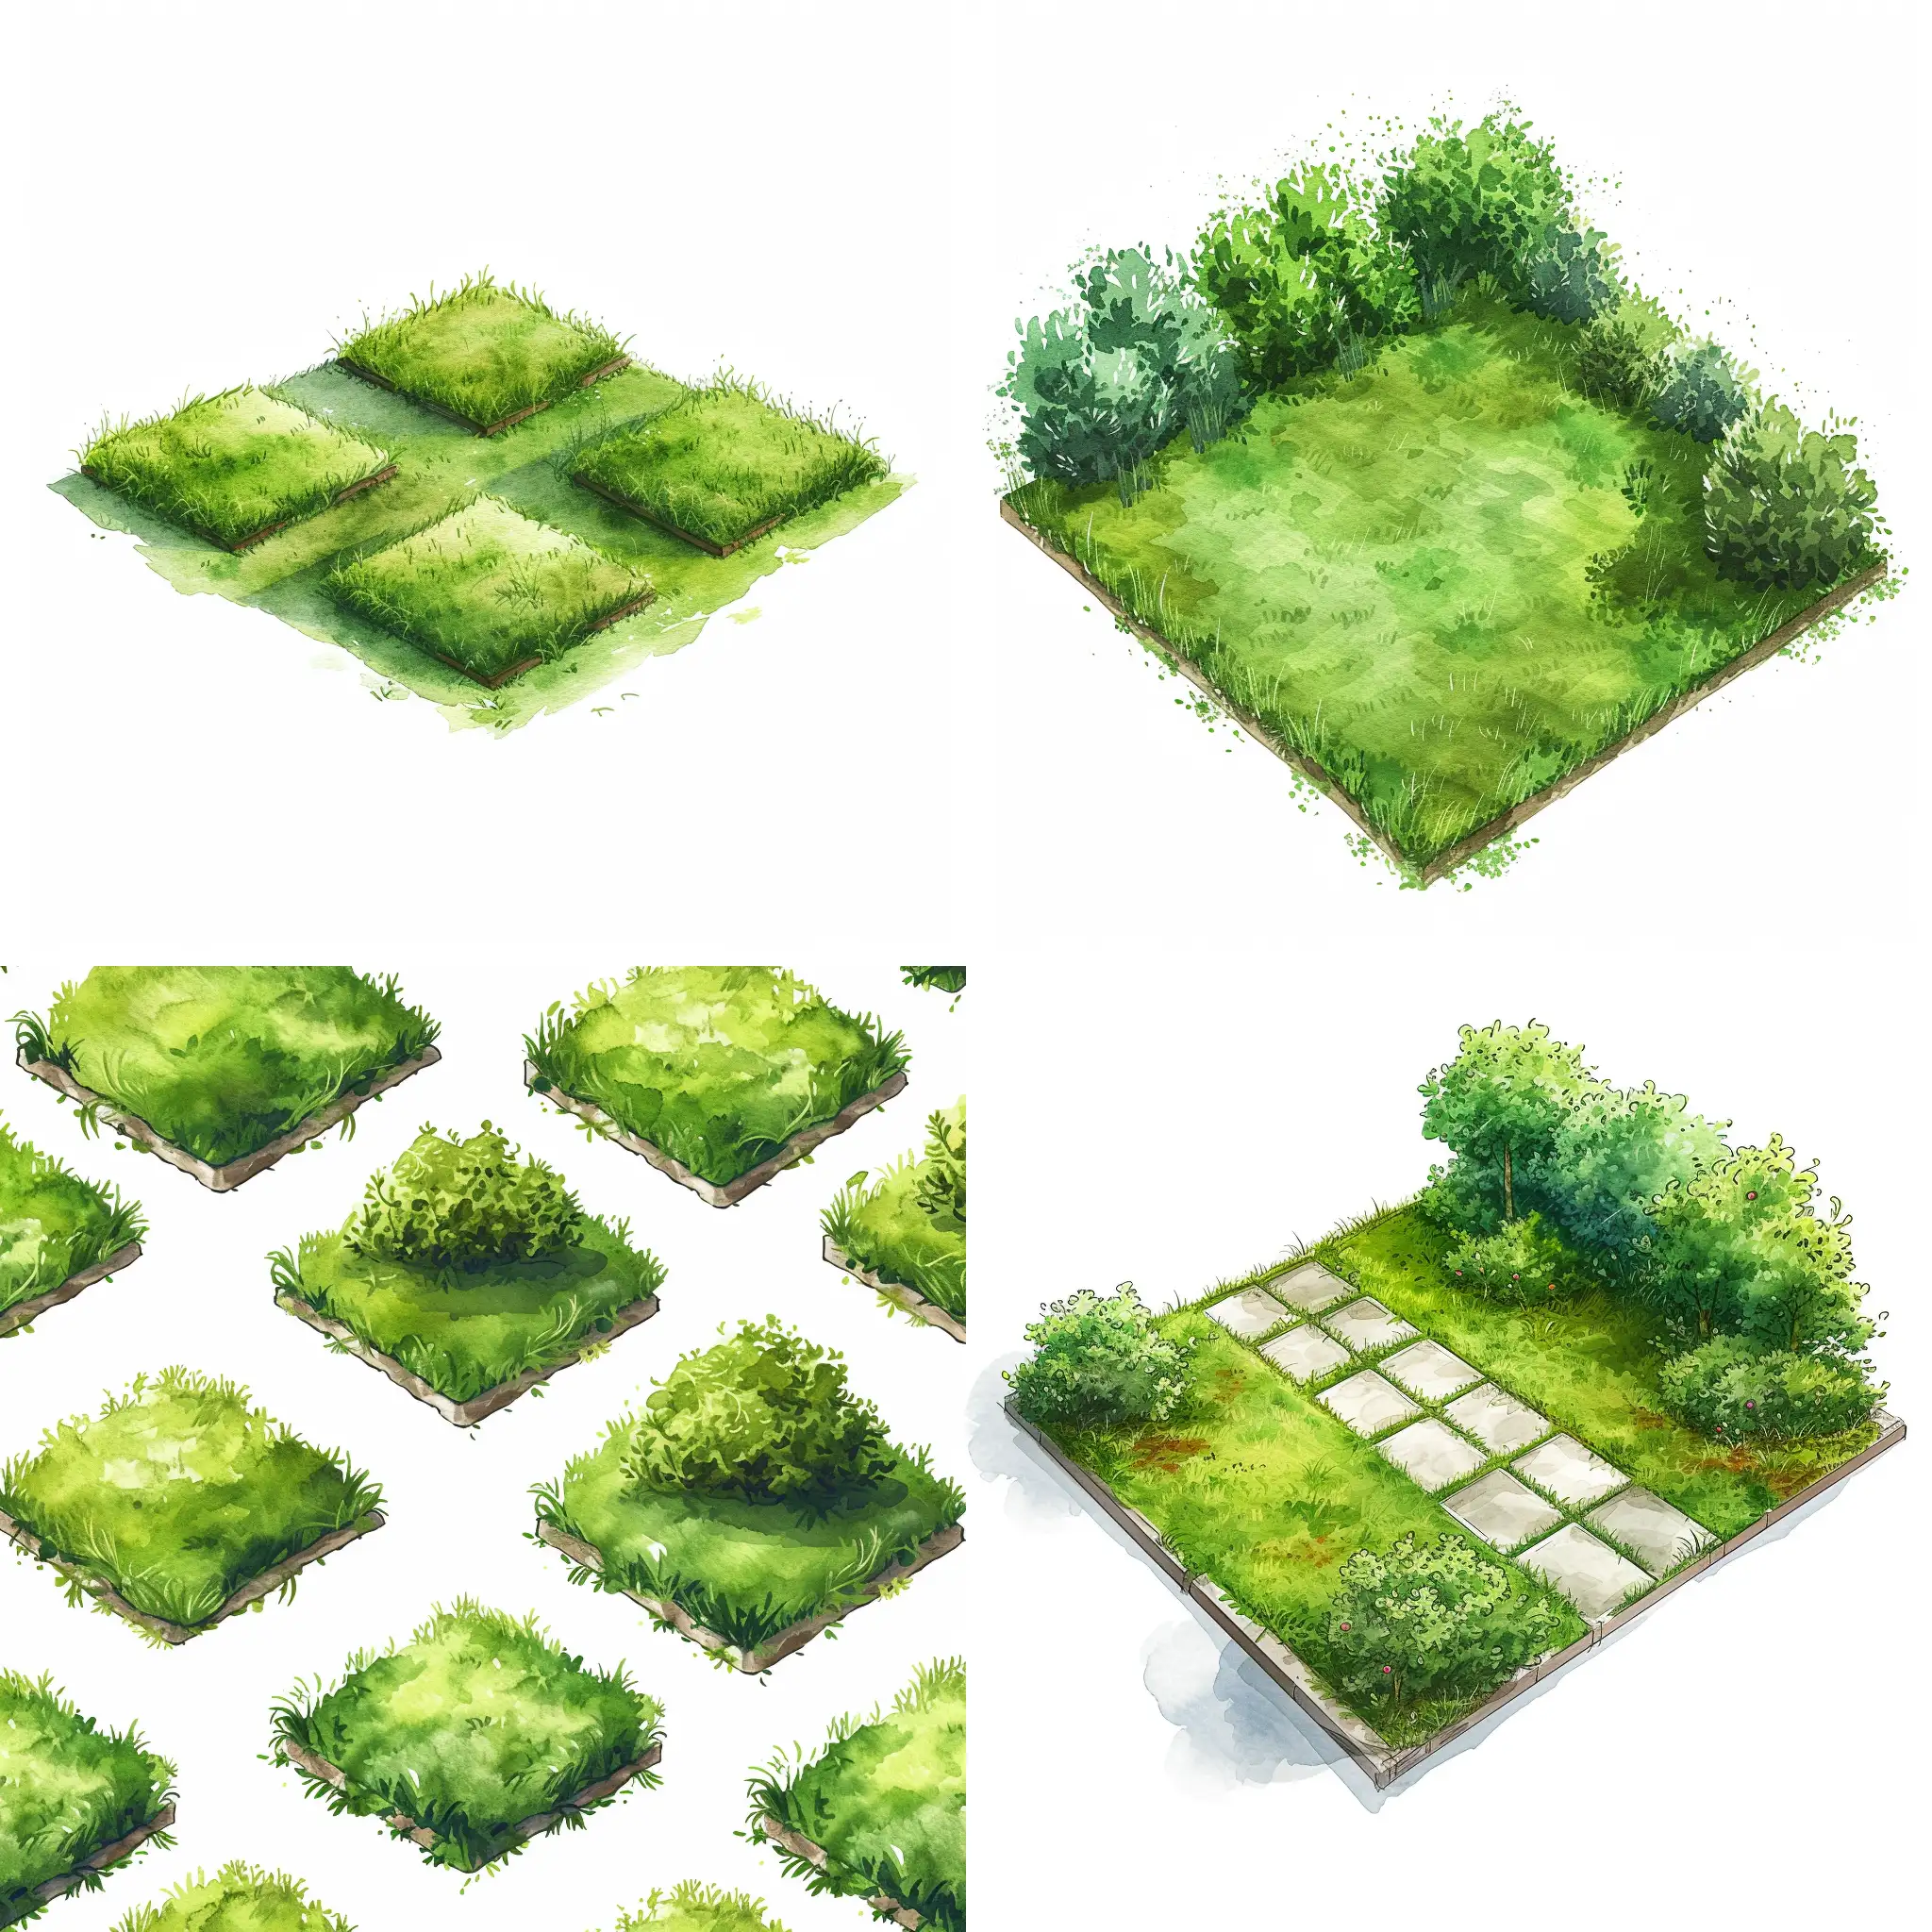 Isometric-Watercolor-Lawn-on-Solid-White-Background